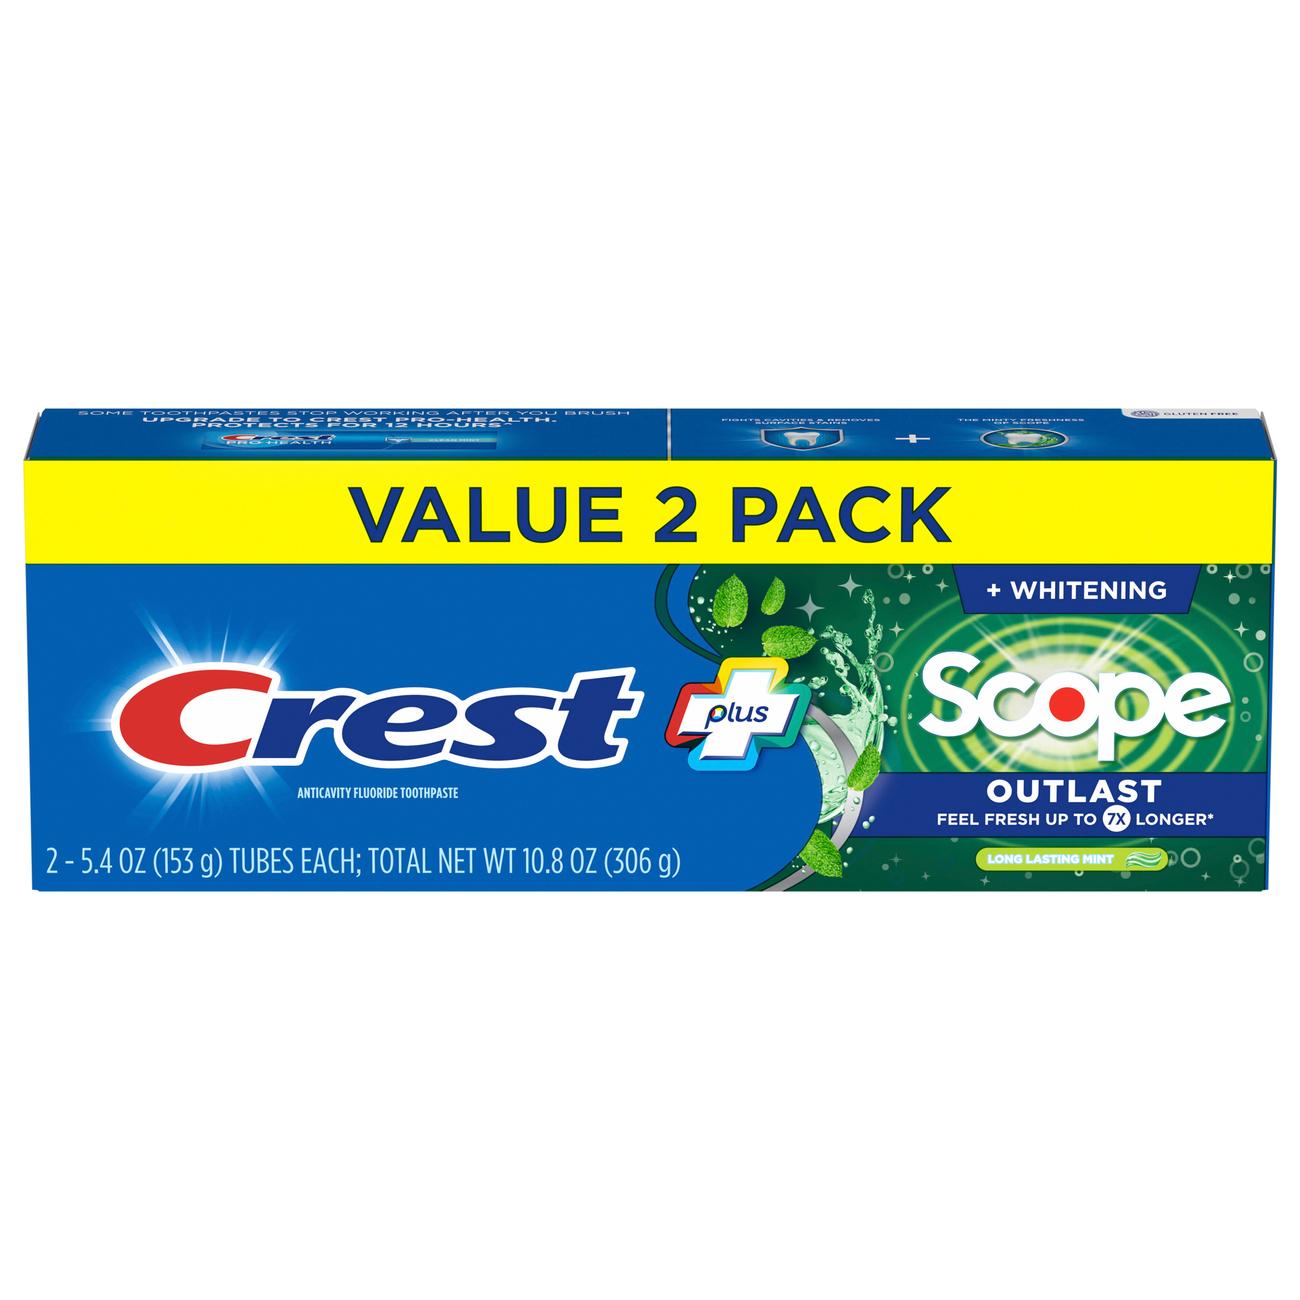 Crest Complete + Scope Outlast Whitening Toothpaste - Long Lasting Mint, 2 Pk; image 1 of 8